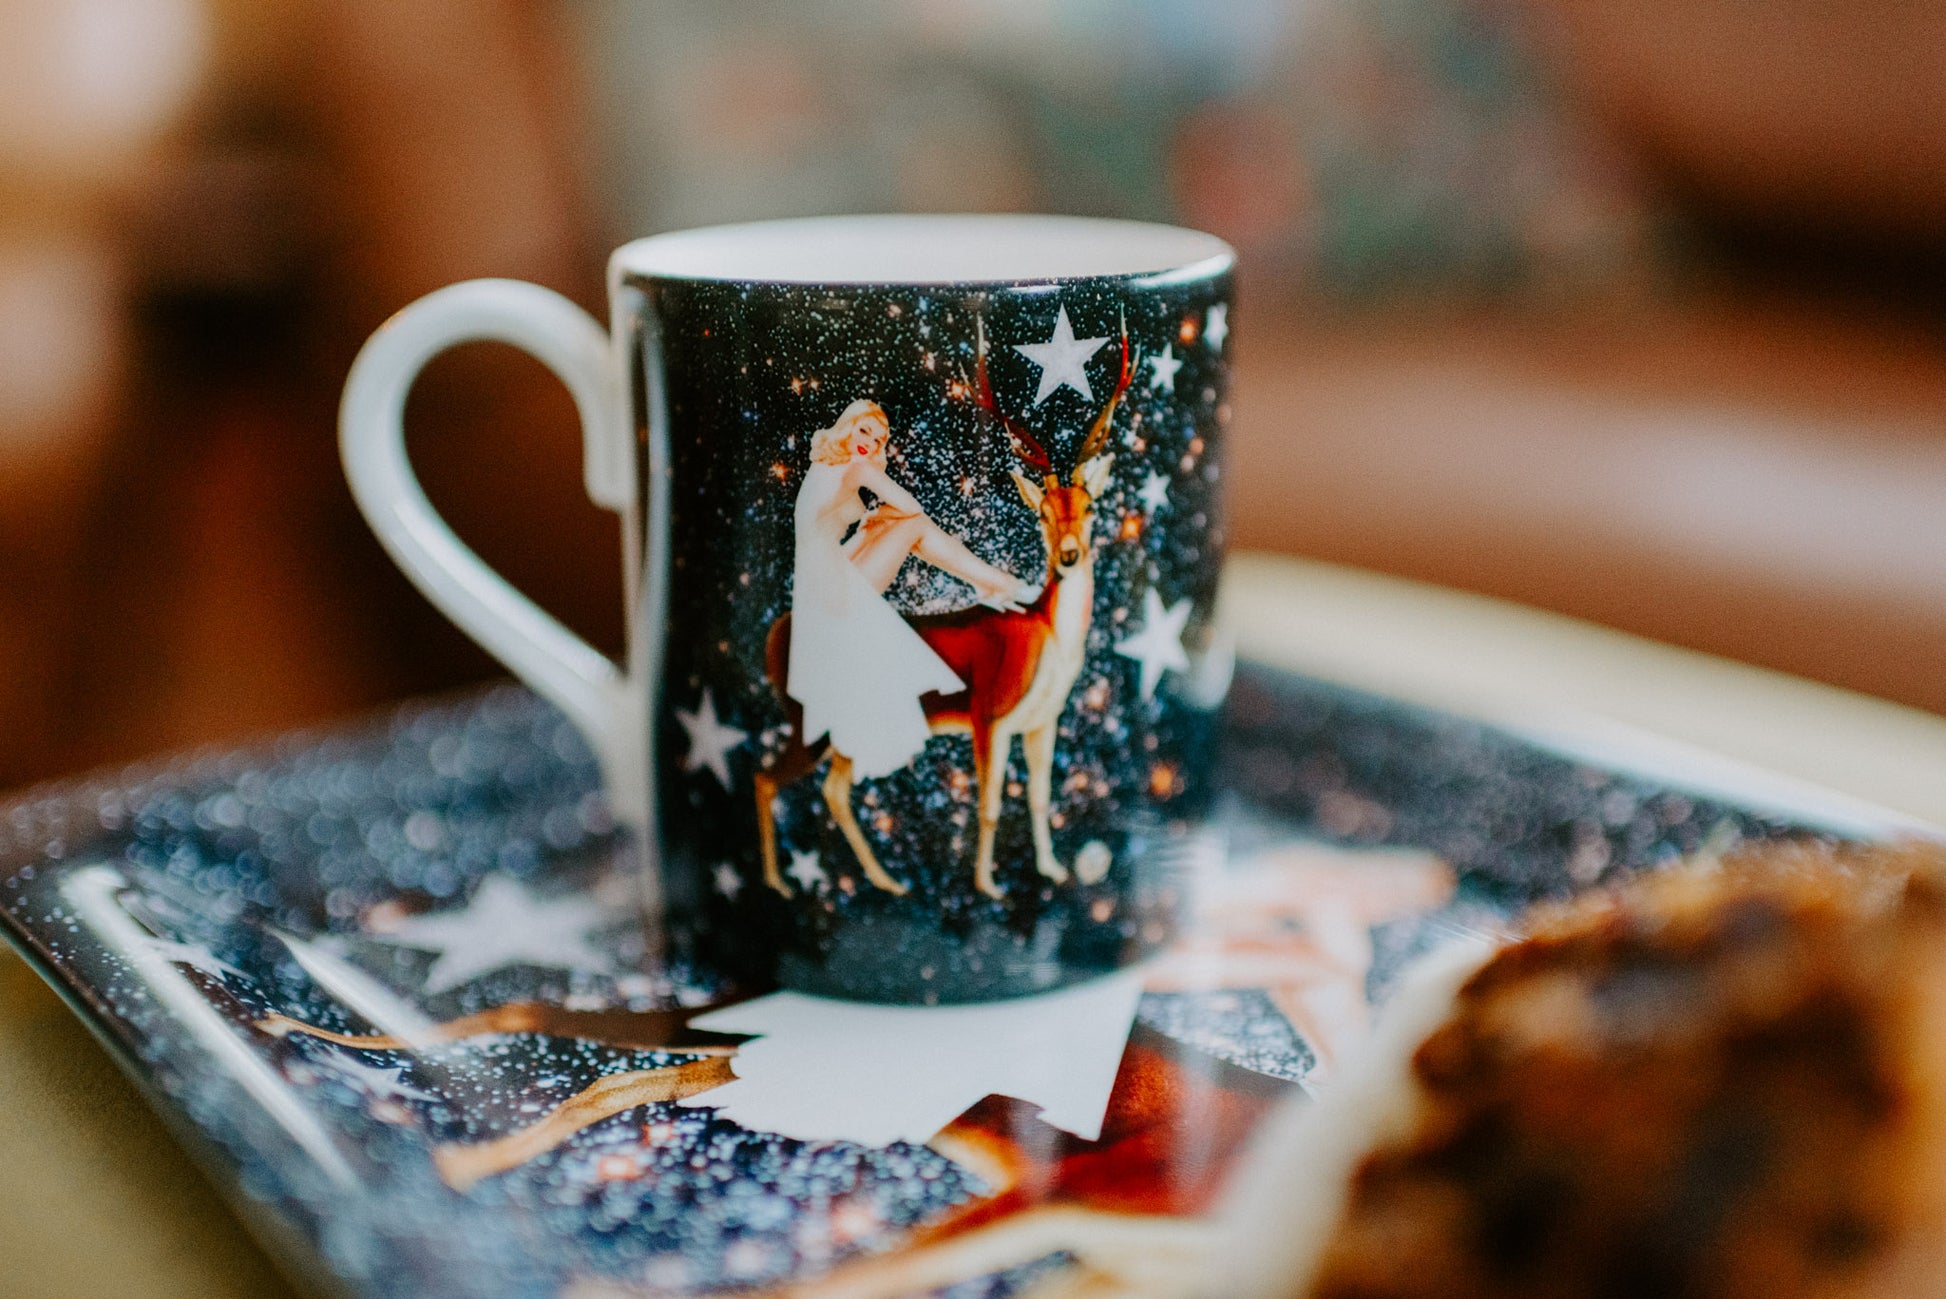 Luxury bone china coffee cup in a maximalist festive astrology design called - festive celeste placed on a tray with cake